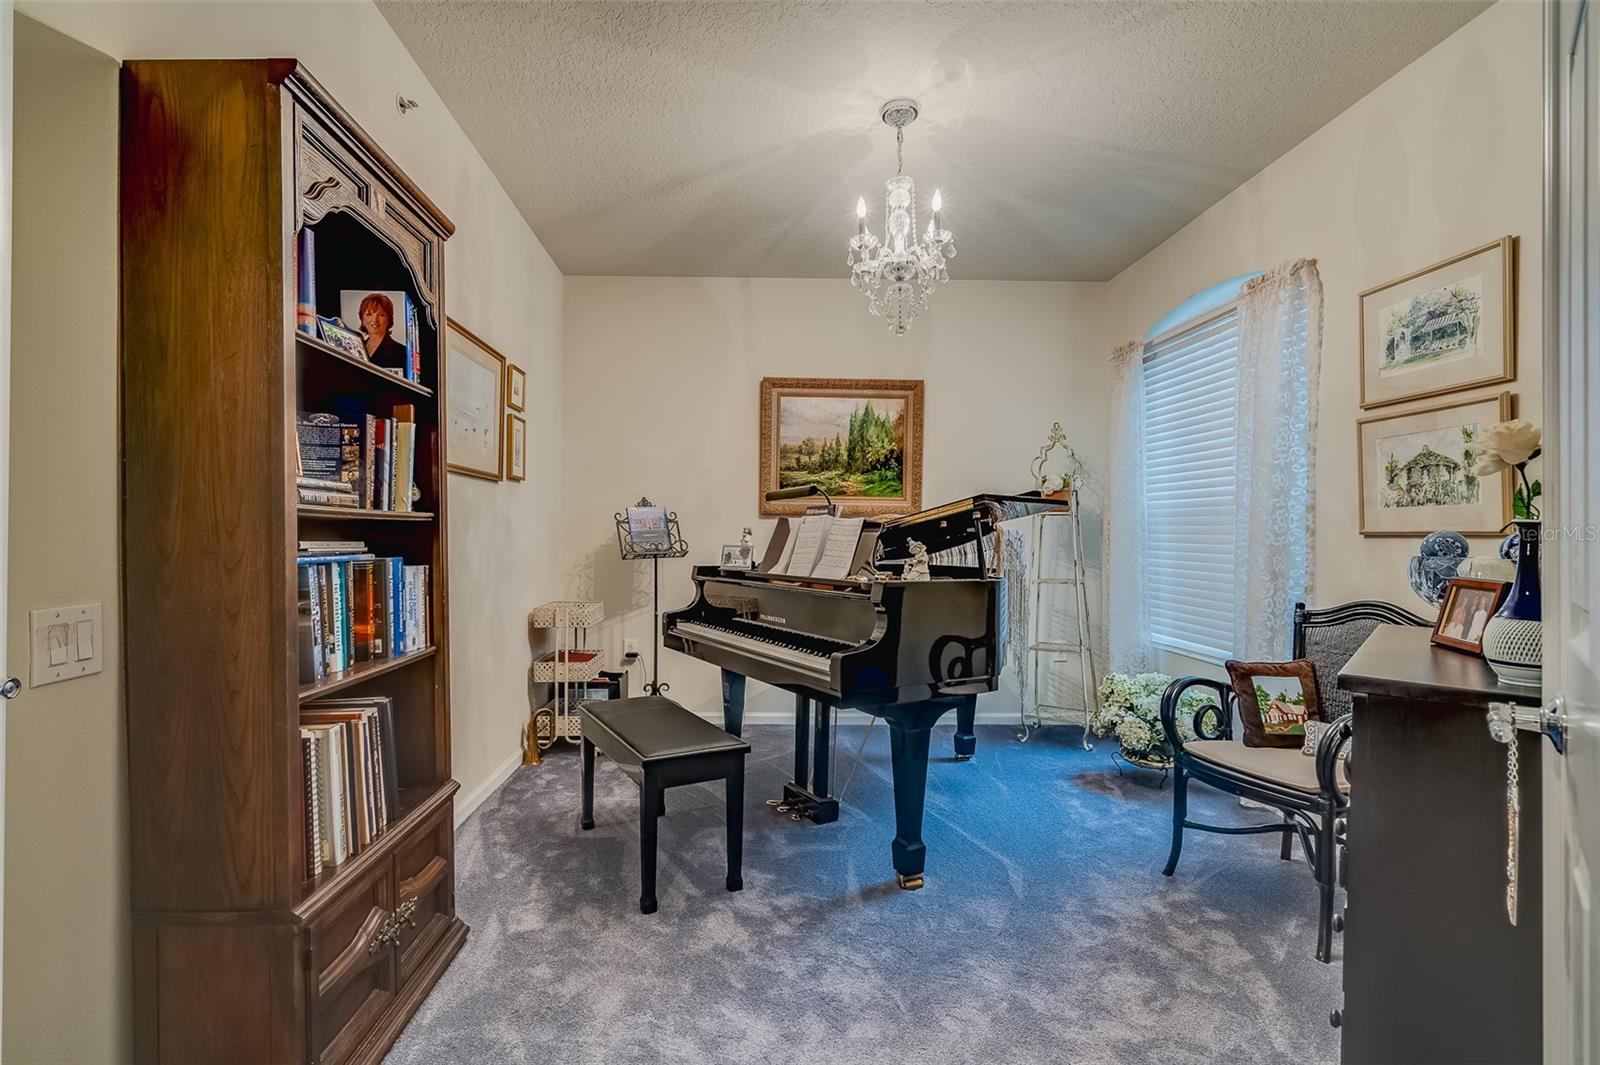 Carpeted third bedroom used for reading & music enjoyment